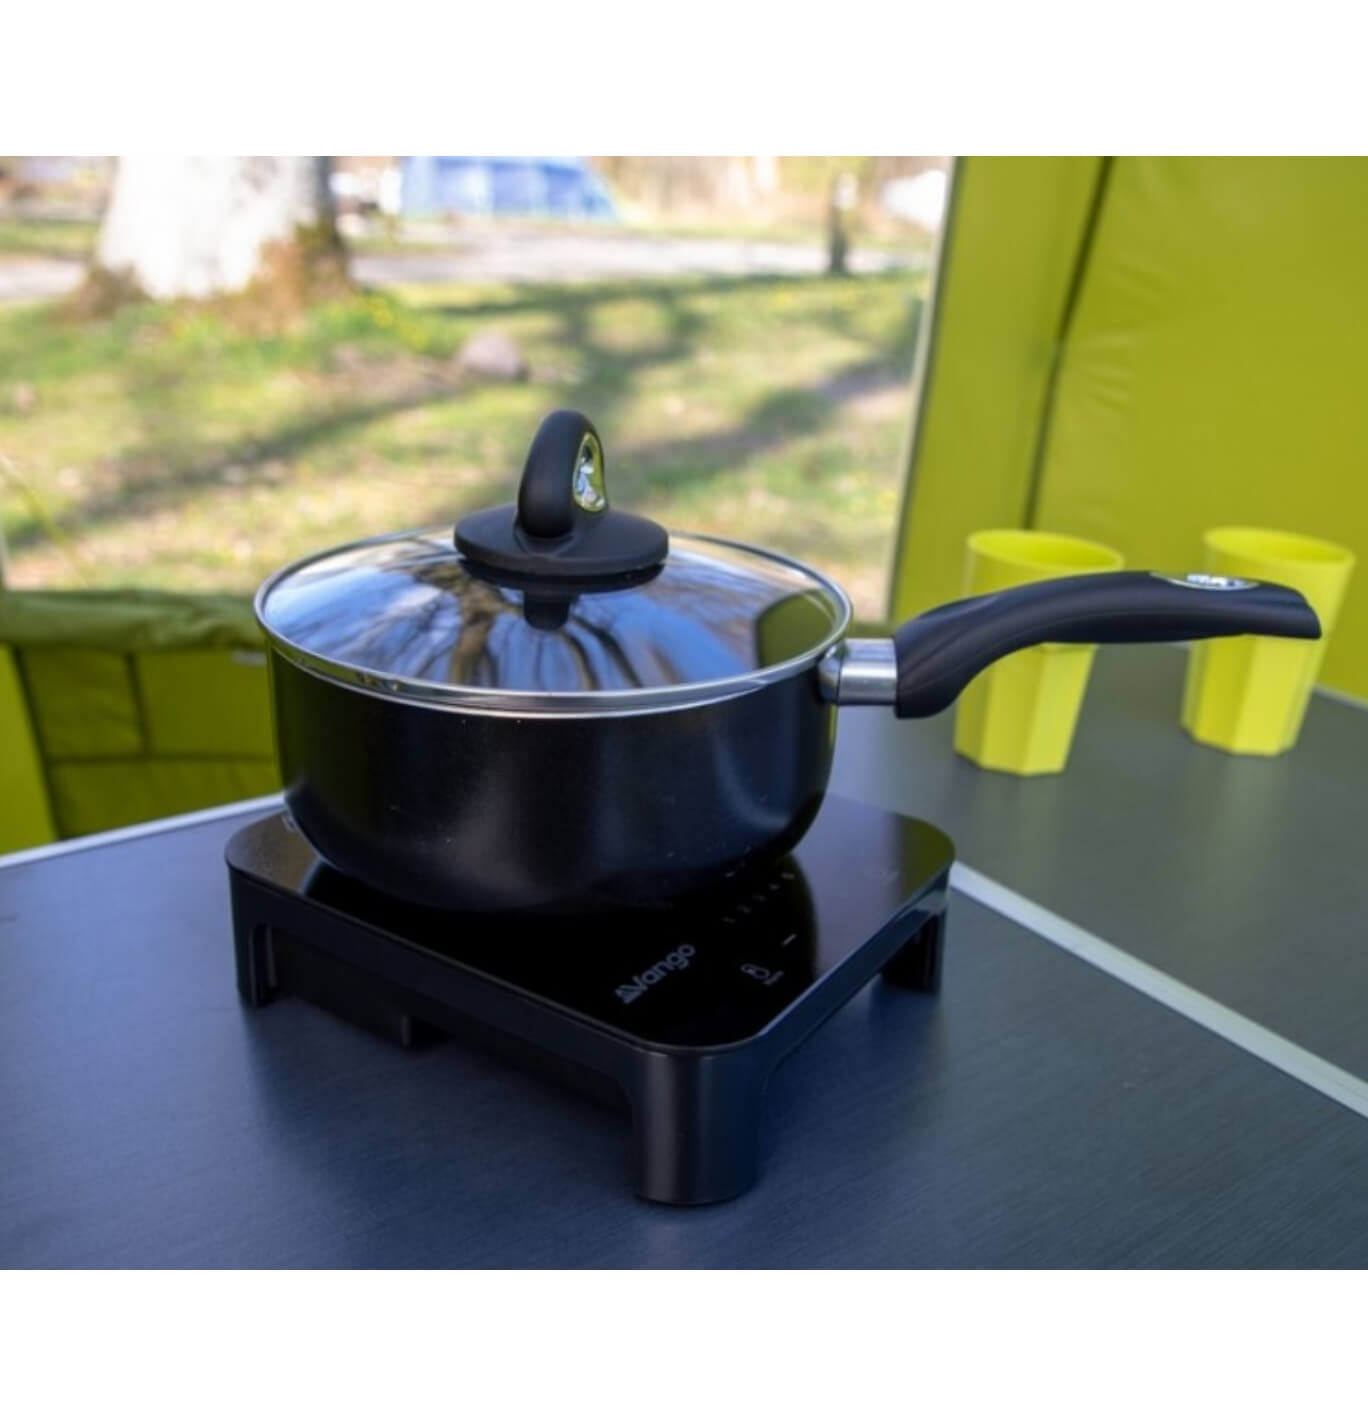 Vango Sizzle Induction Camping Cooker Hob Image